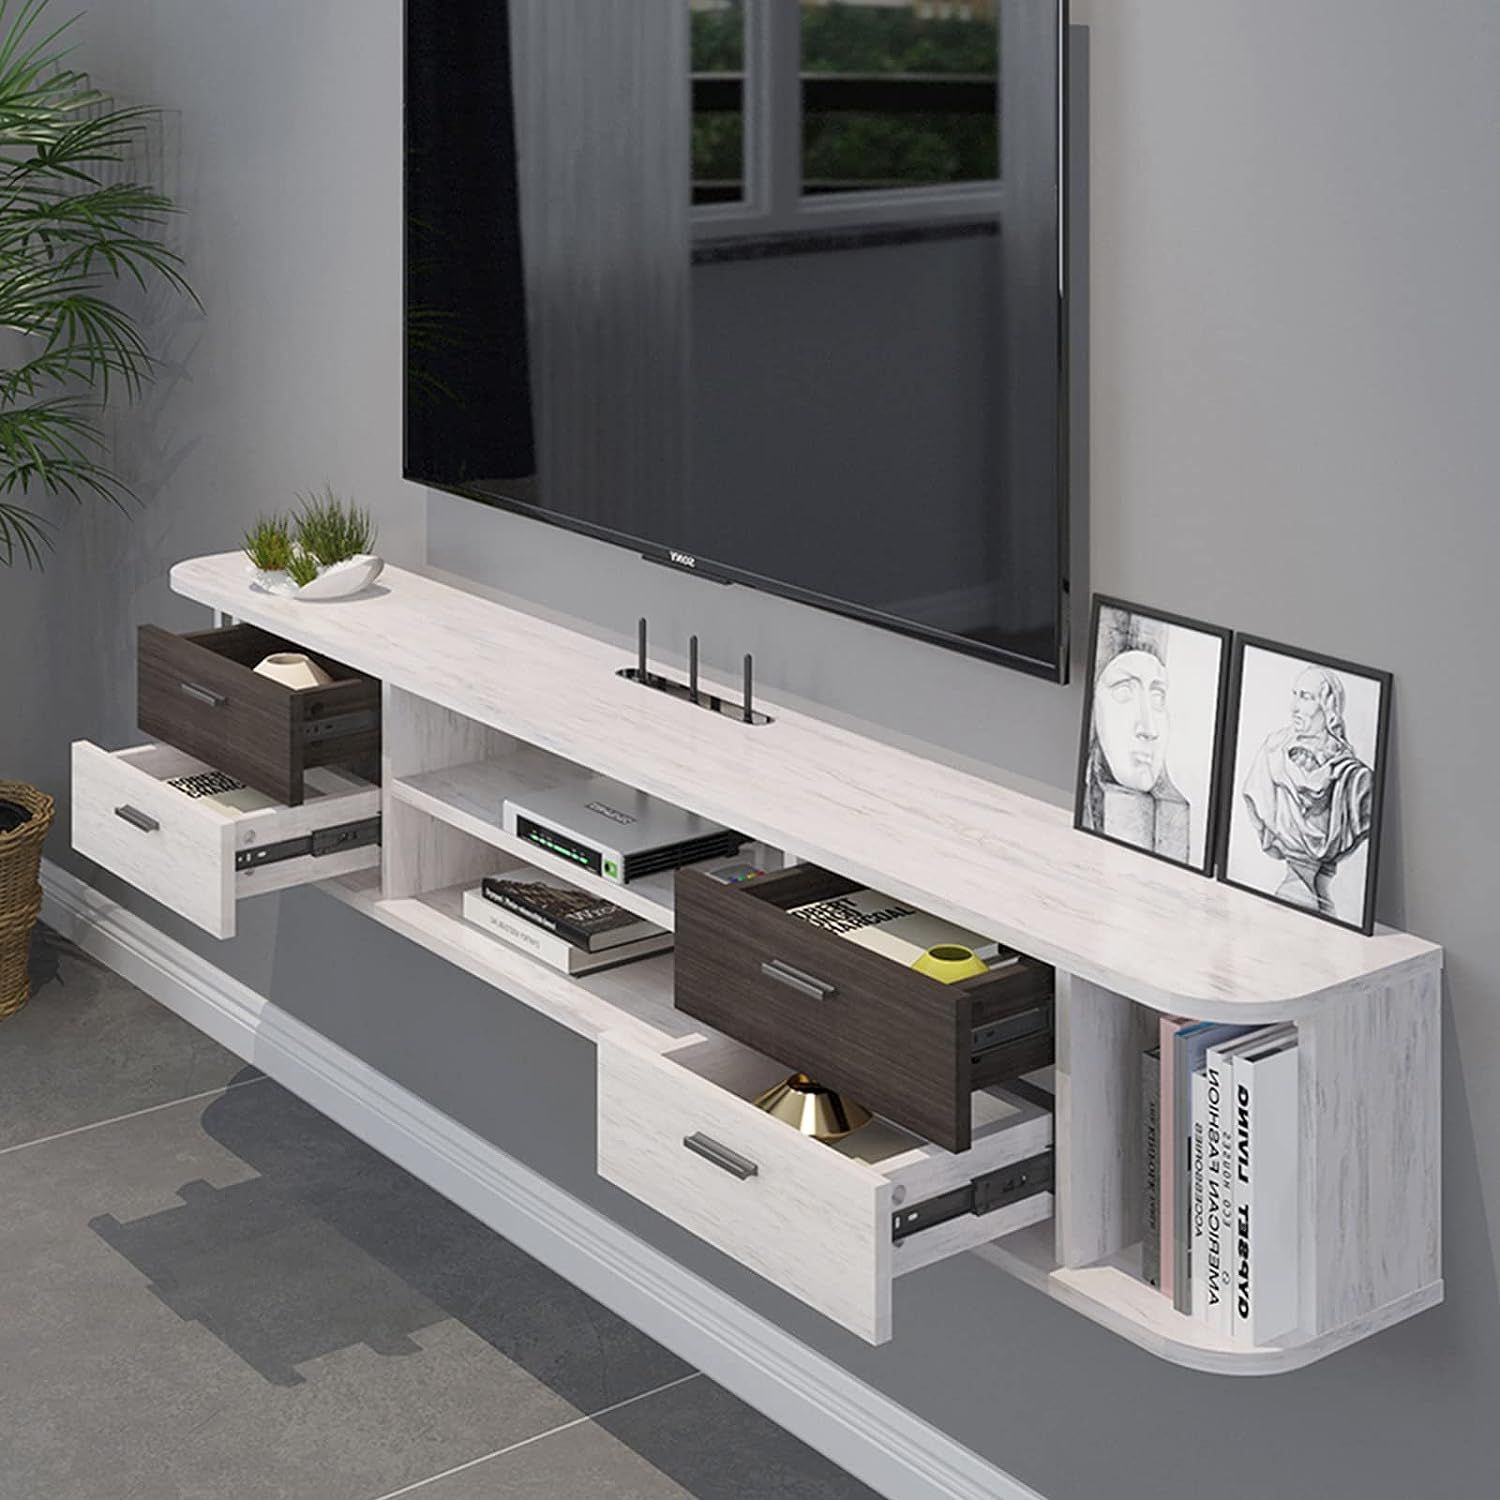 Floating Tv Stand With 4 Drawers, Wall Mounted Media Italy | Ubuy Pertaining To Wall Mounted Floating Tv Stands (View 6 of 15)